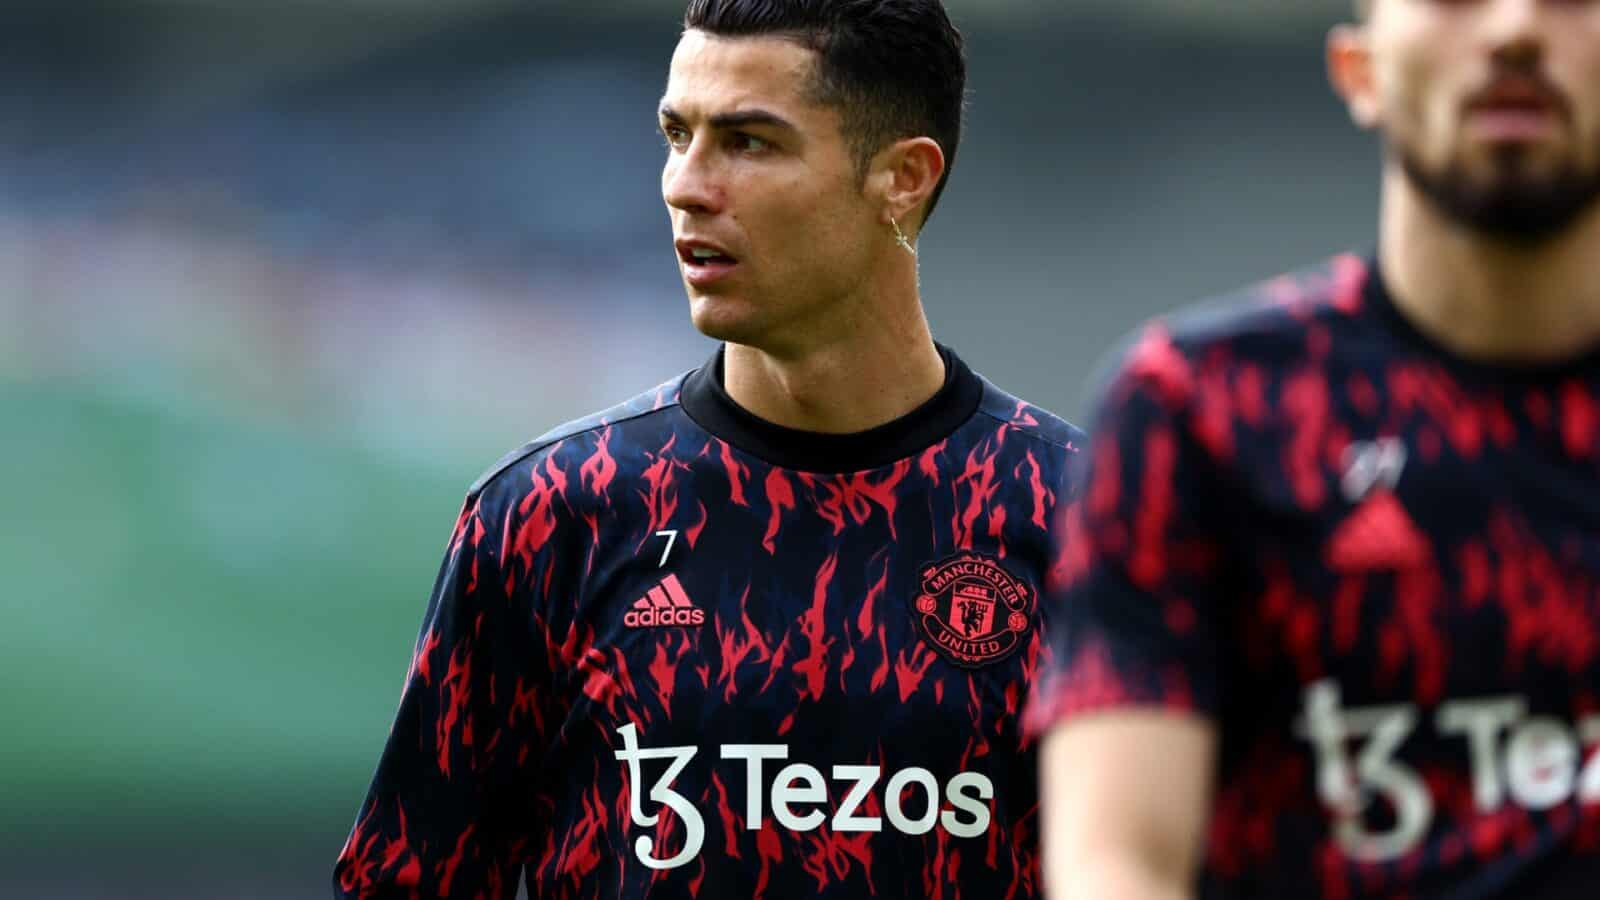 Manchester United, the world-famous English football club, has joined the world of NFTs in participation with Tezos blockchain, the training sponsor of the 'Red Devils